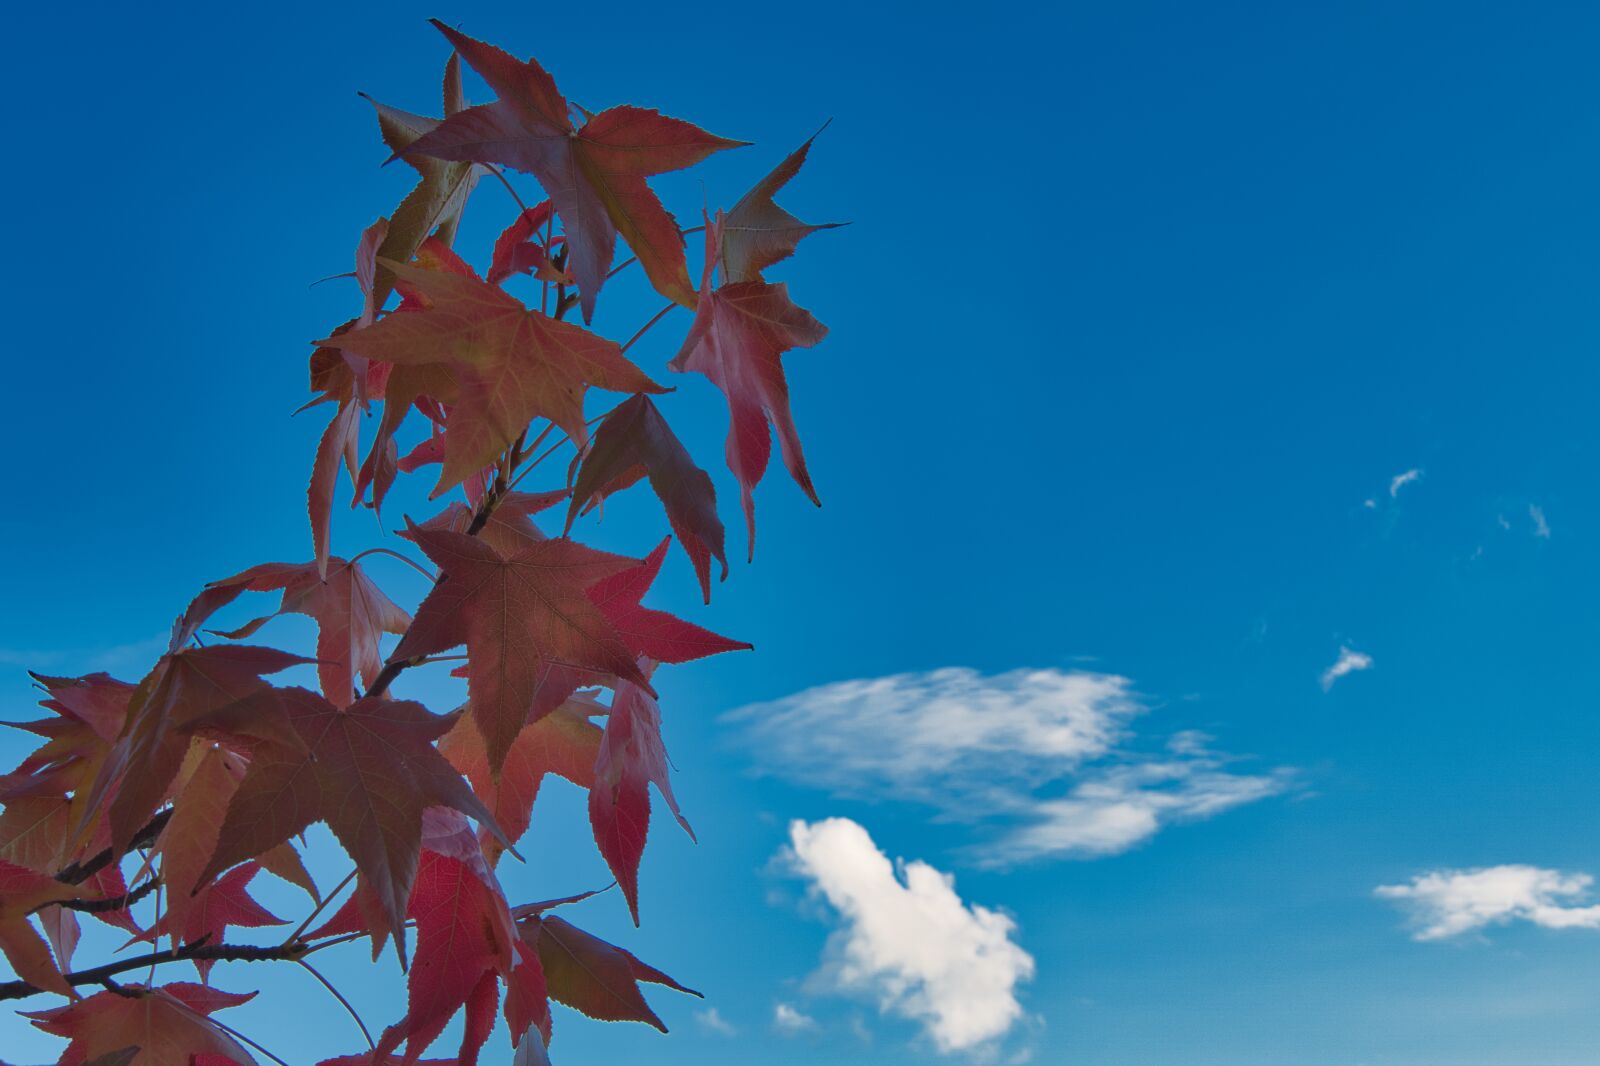 Sony a6400 sample photo. "Sky, clouds, leaves" photography